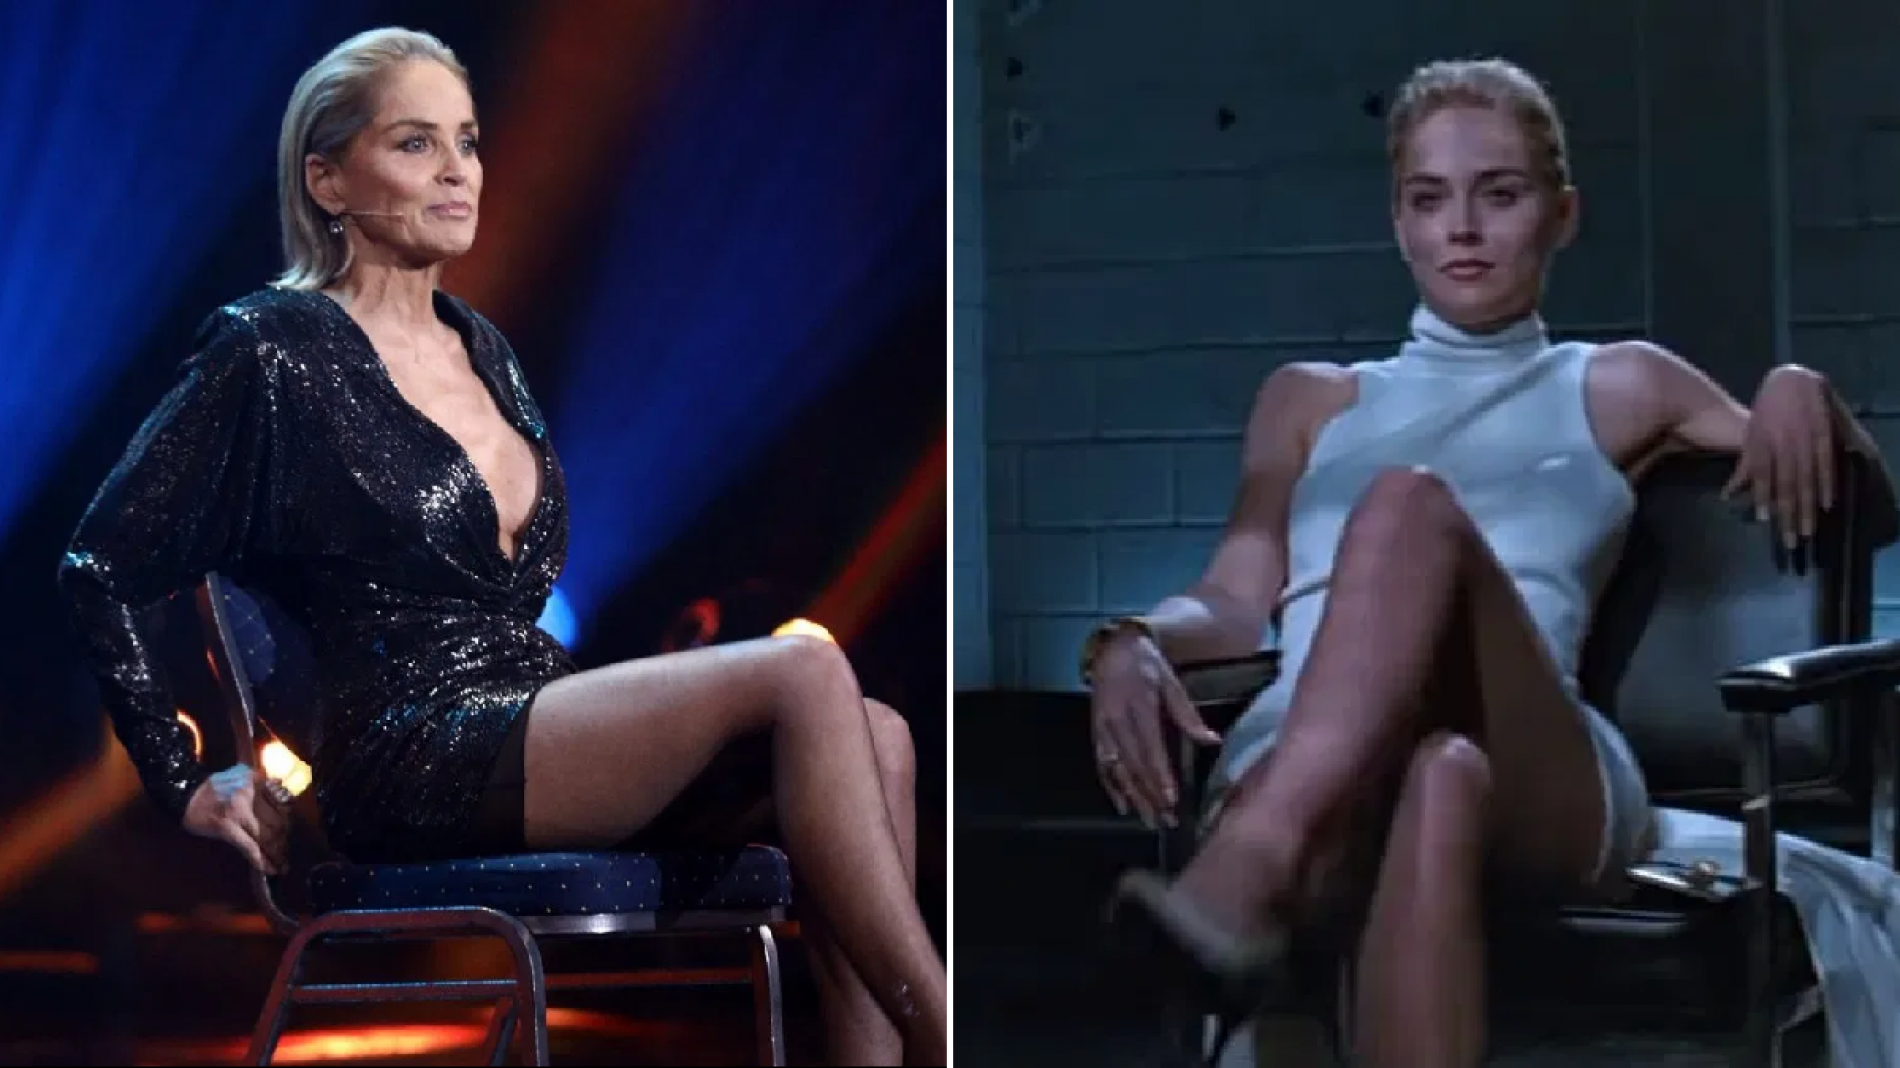 Sharon Stone recreates iconic Basic Instinct moment for powerful GQ Woman of the Year speech